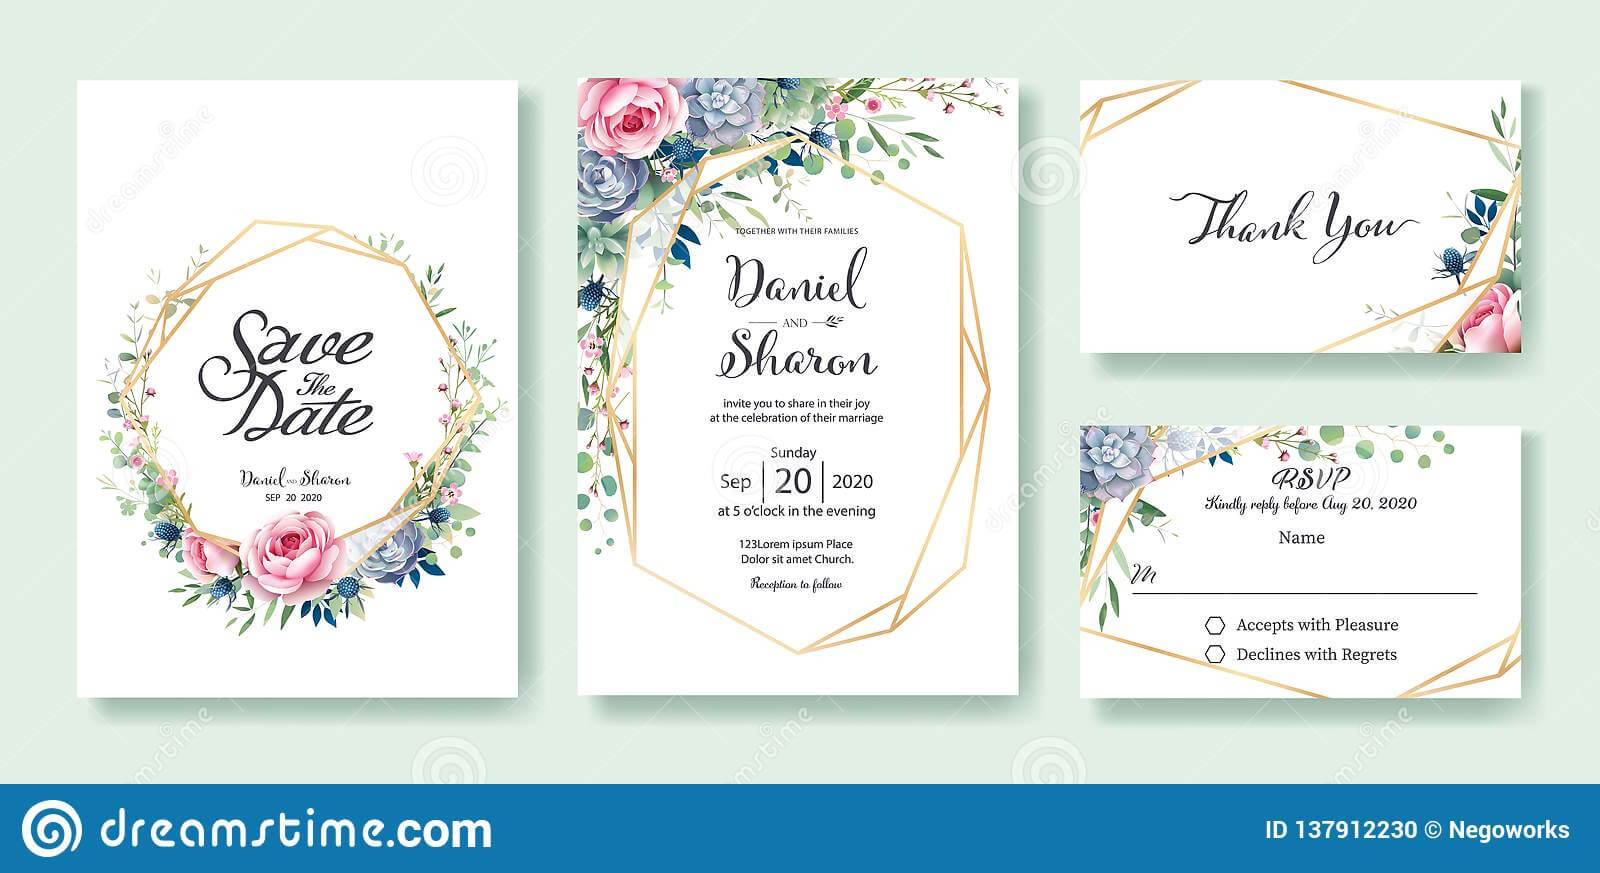 Wedding Invitation, Save The Date, Thank You, Rsvp Card With Regard To Free Printable Wedding Rsvp Card Templates